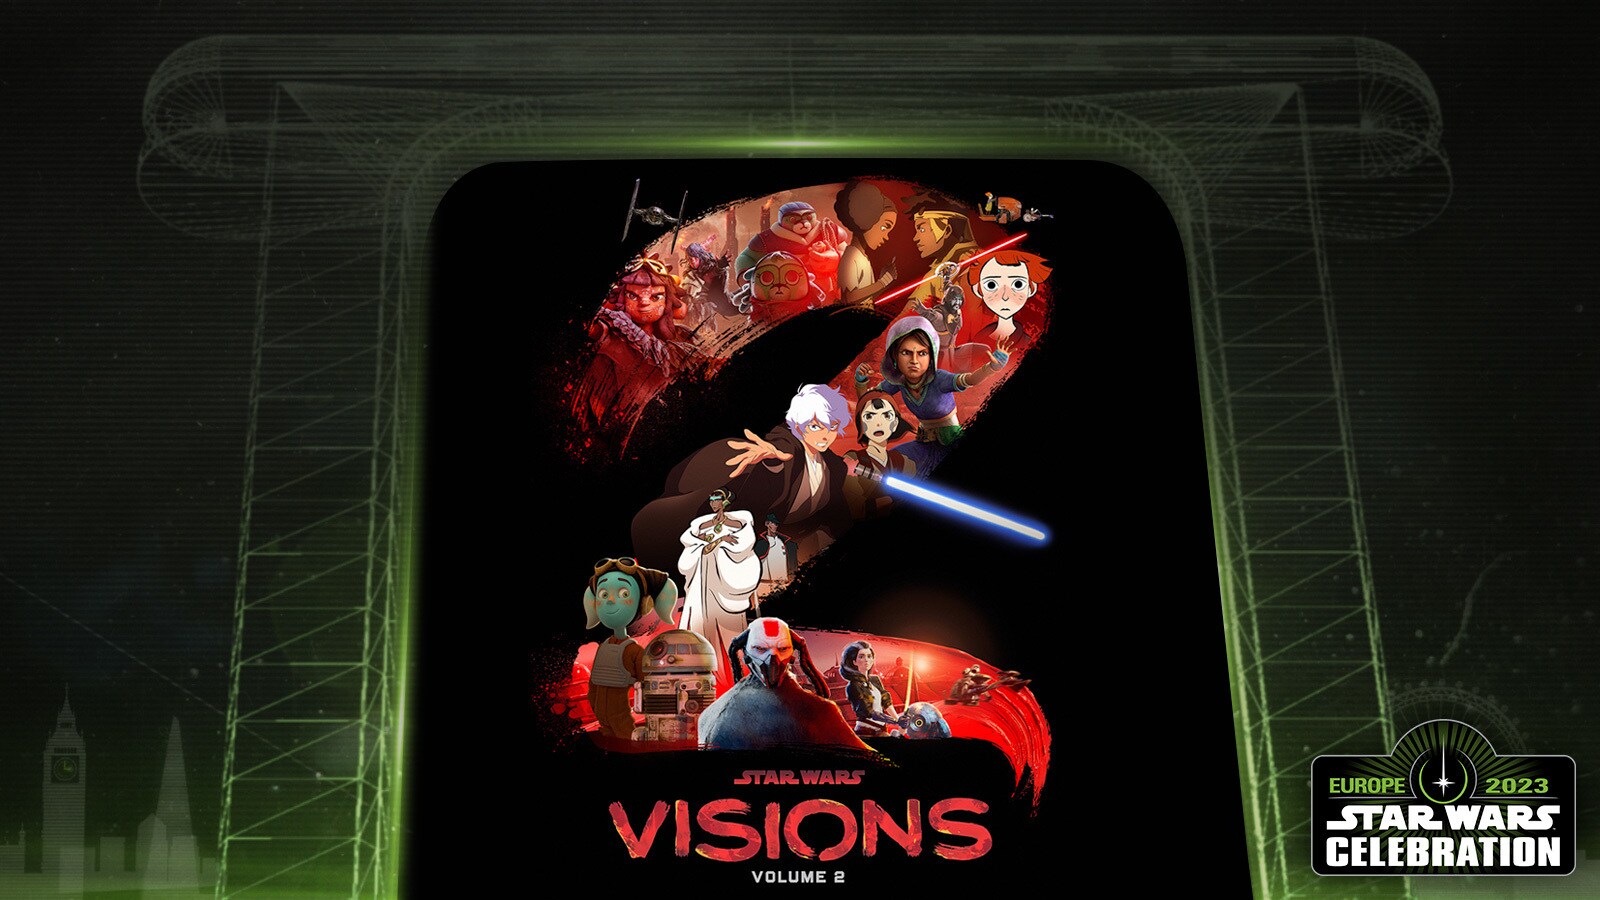 SWCE 2023: Star Wars: Visions Volume 2 Trailer, Key Art, and Cast Revealed